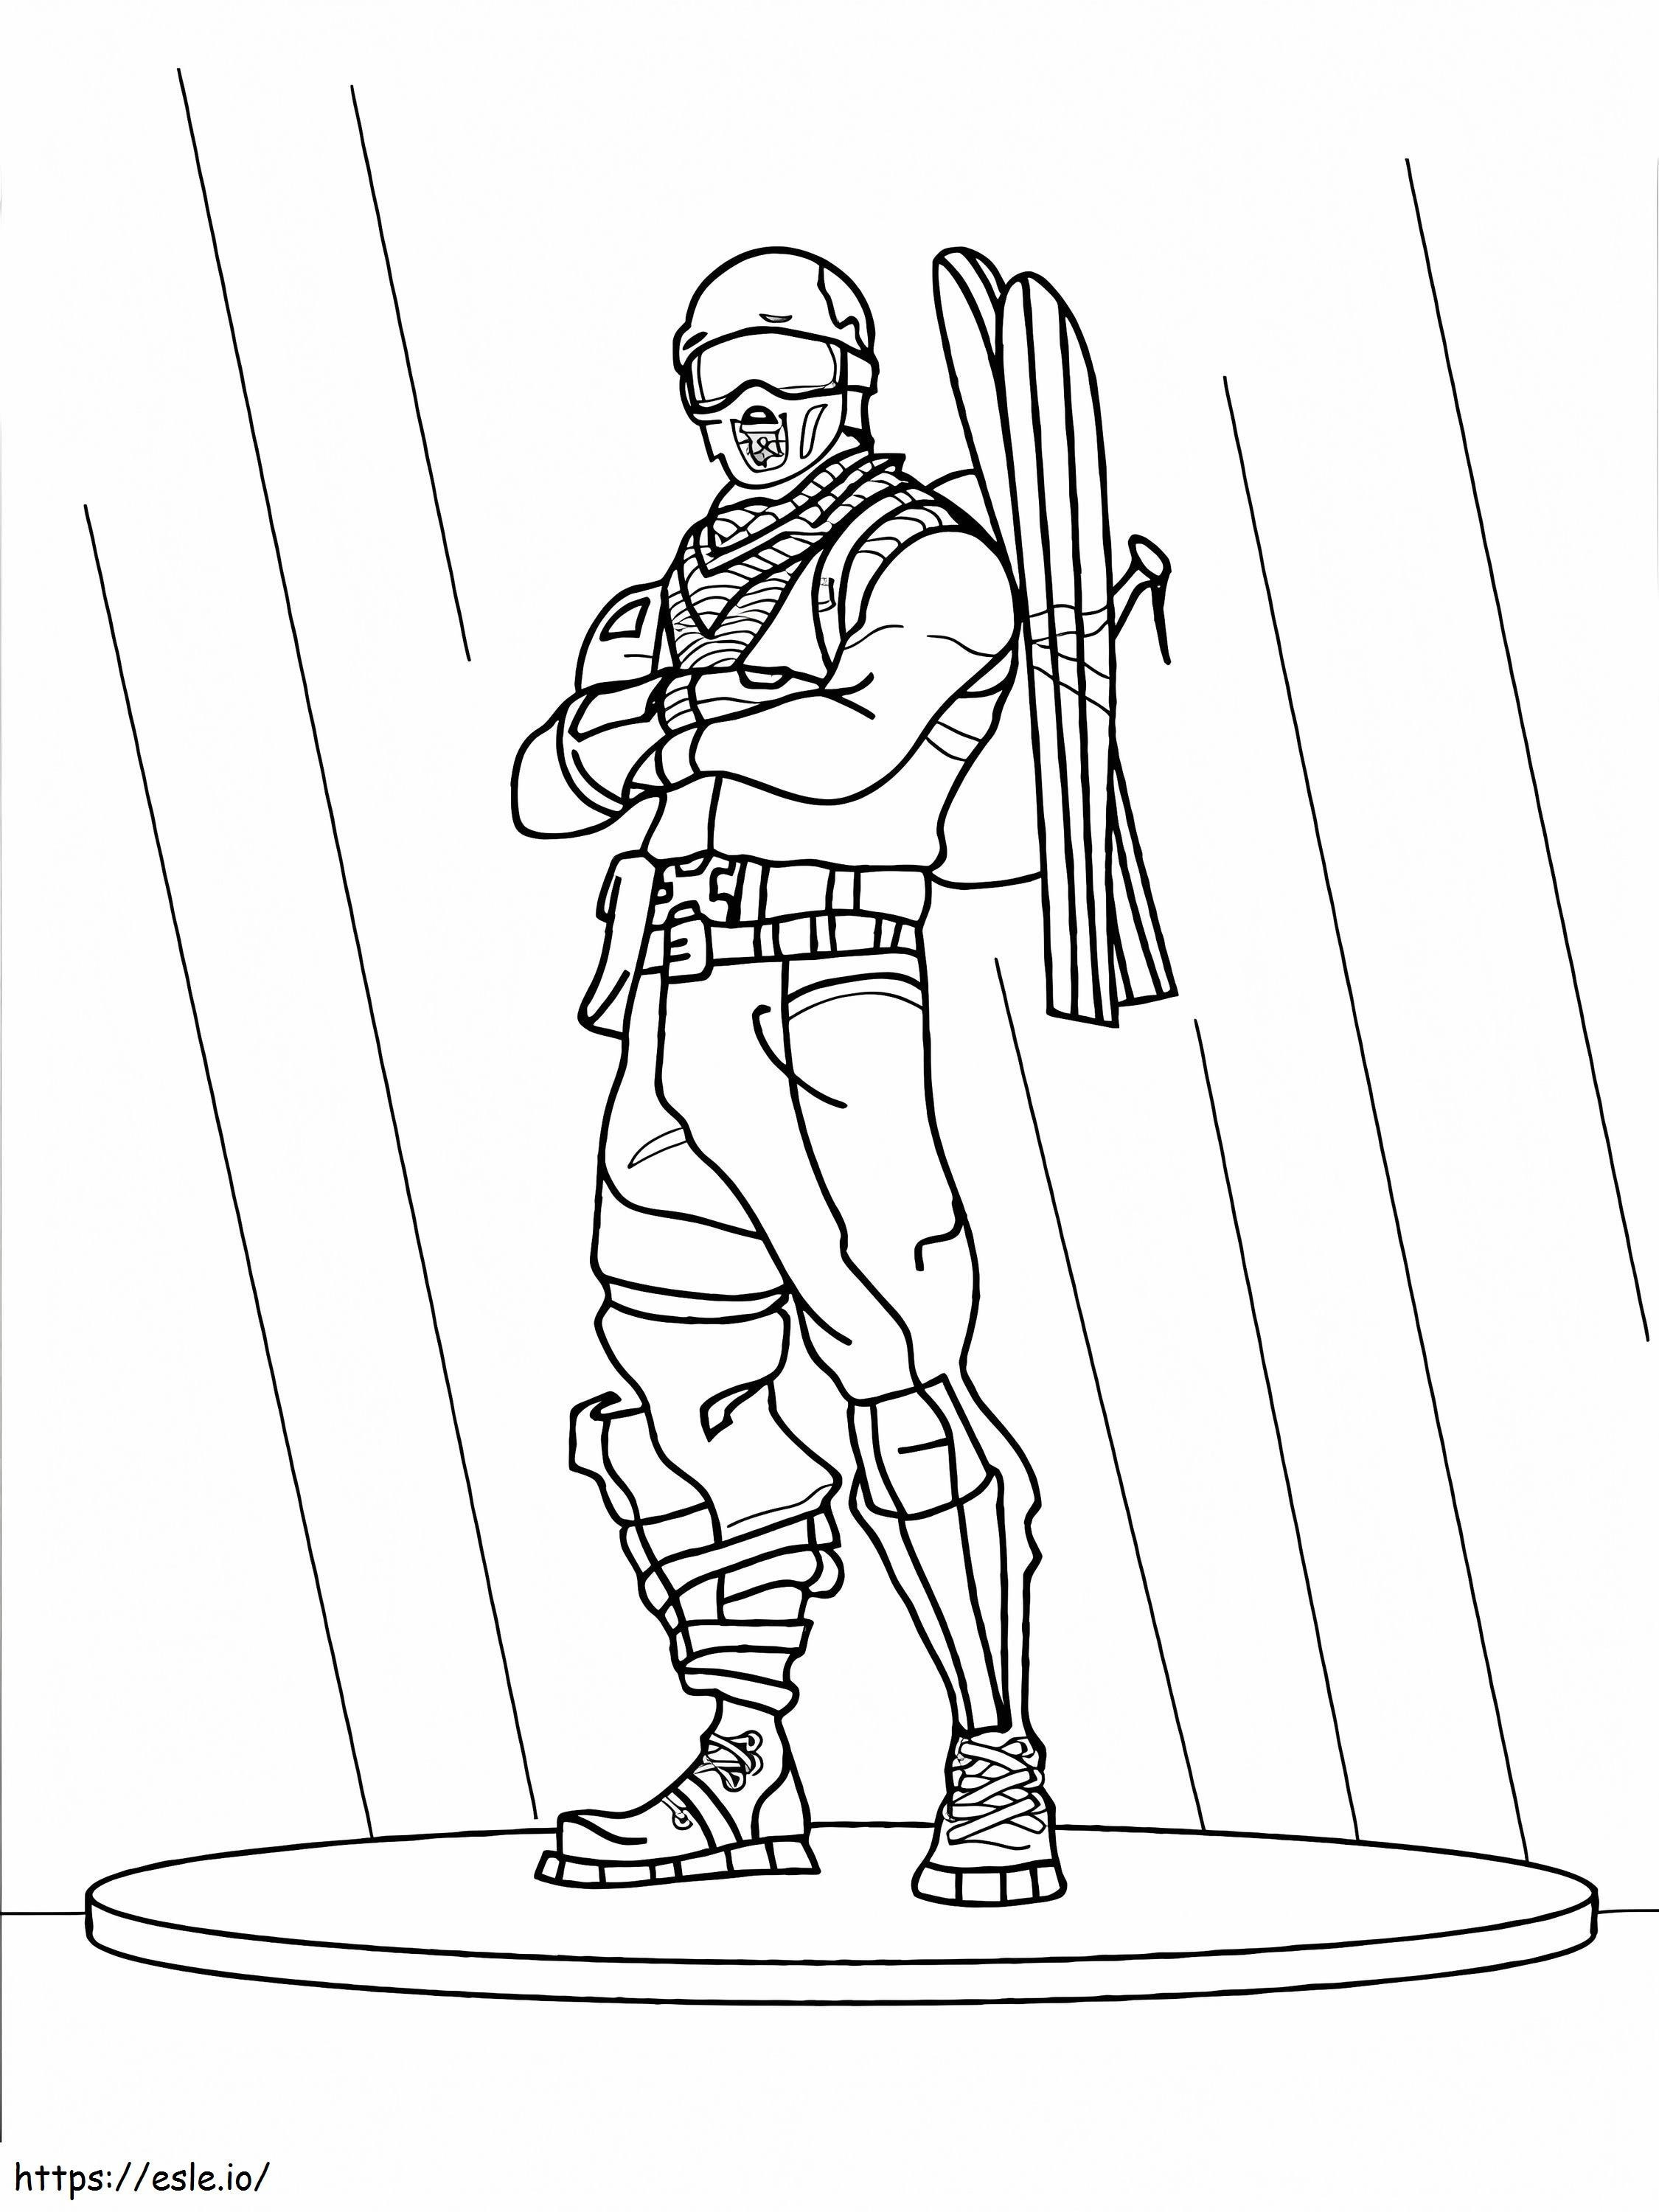 Alpine Ace Fortnite coloring page